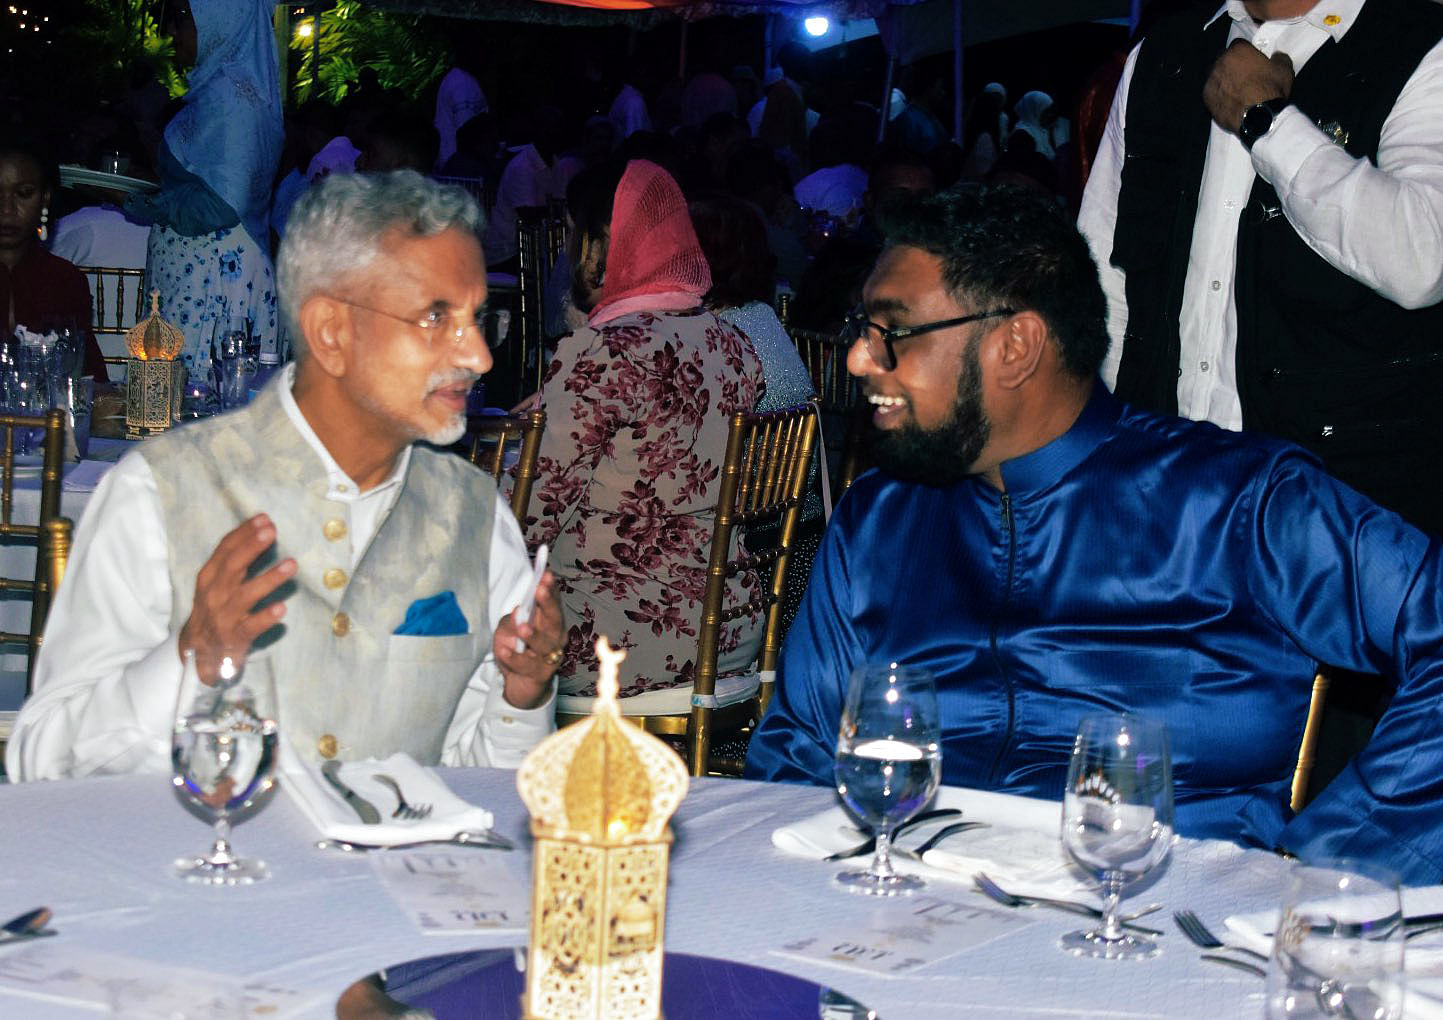 External Affairs Minister S. Jaishankar interacts with Guyana President Irfaan Ali during the latter's Eid dinner at Georgetown in Guyana in April | ANI